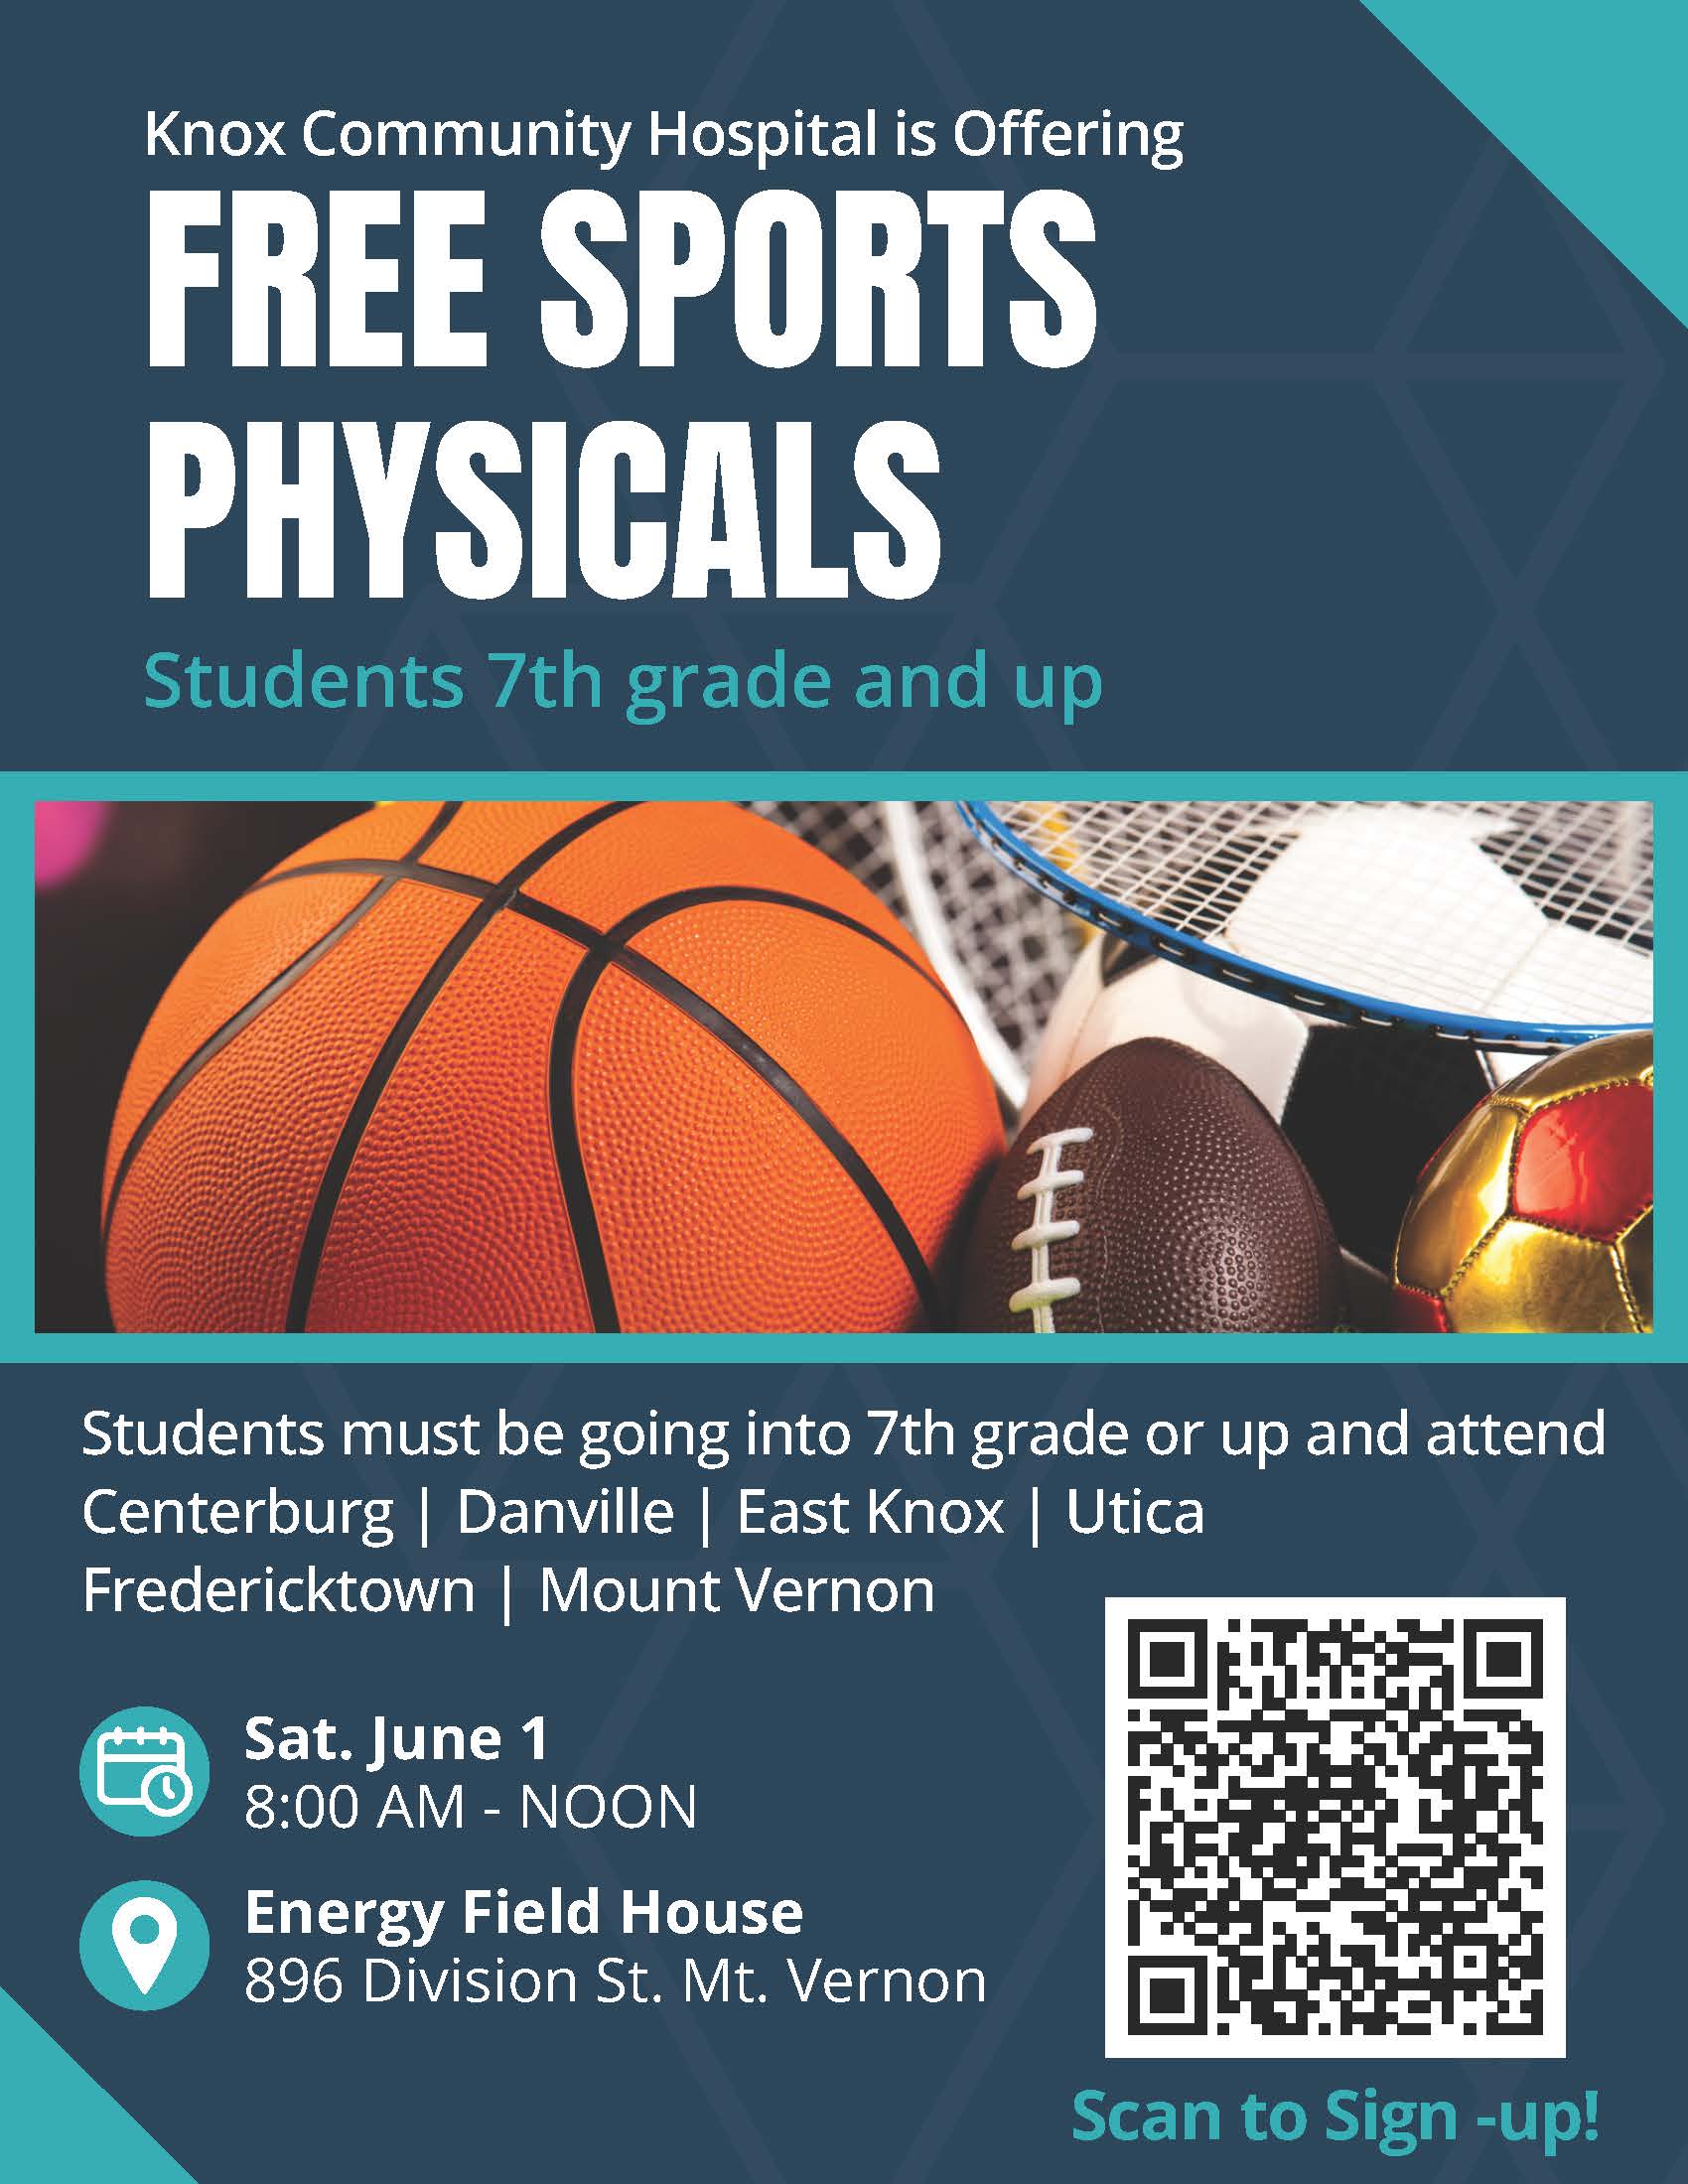 Sports Physicals flyer link.